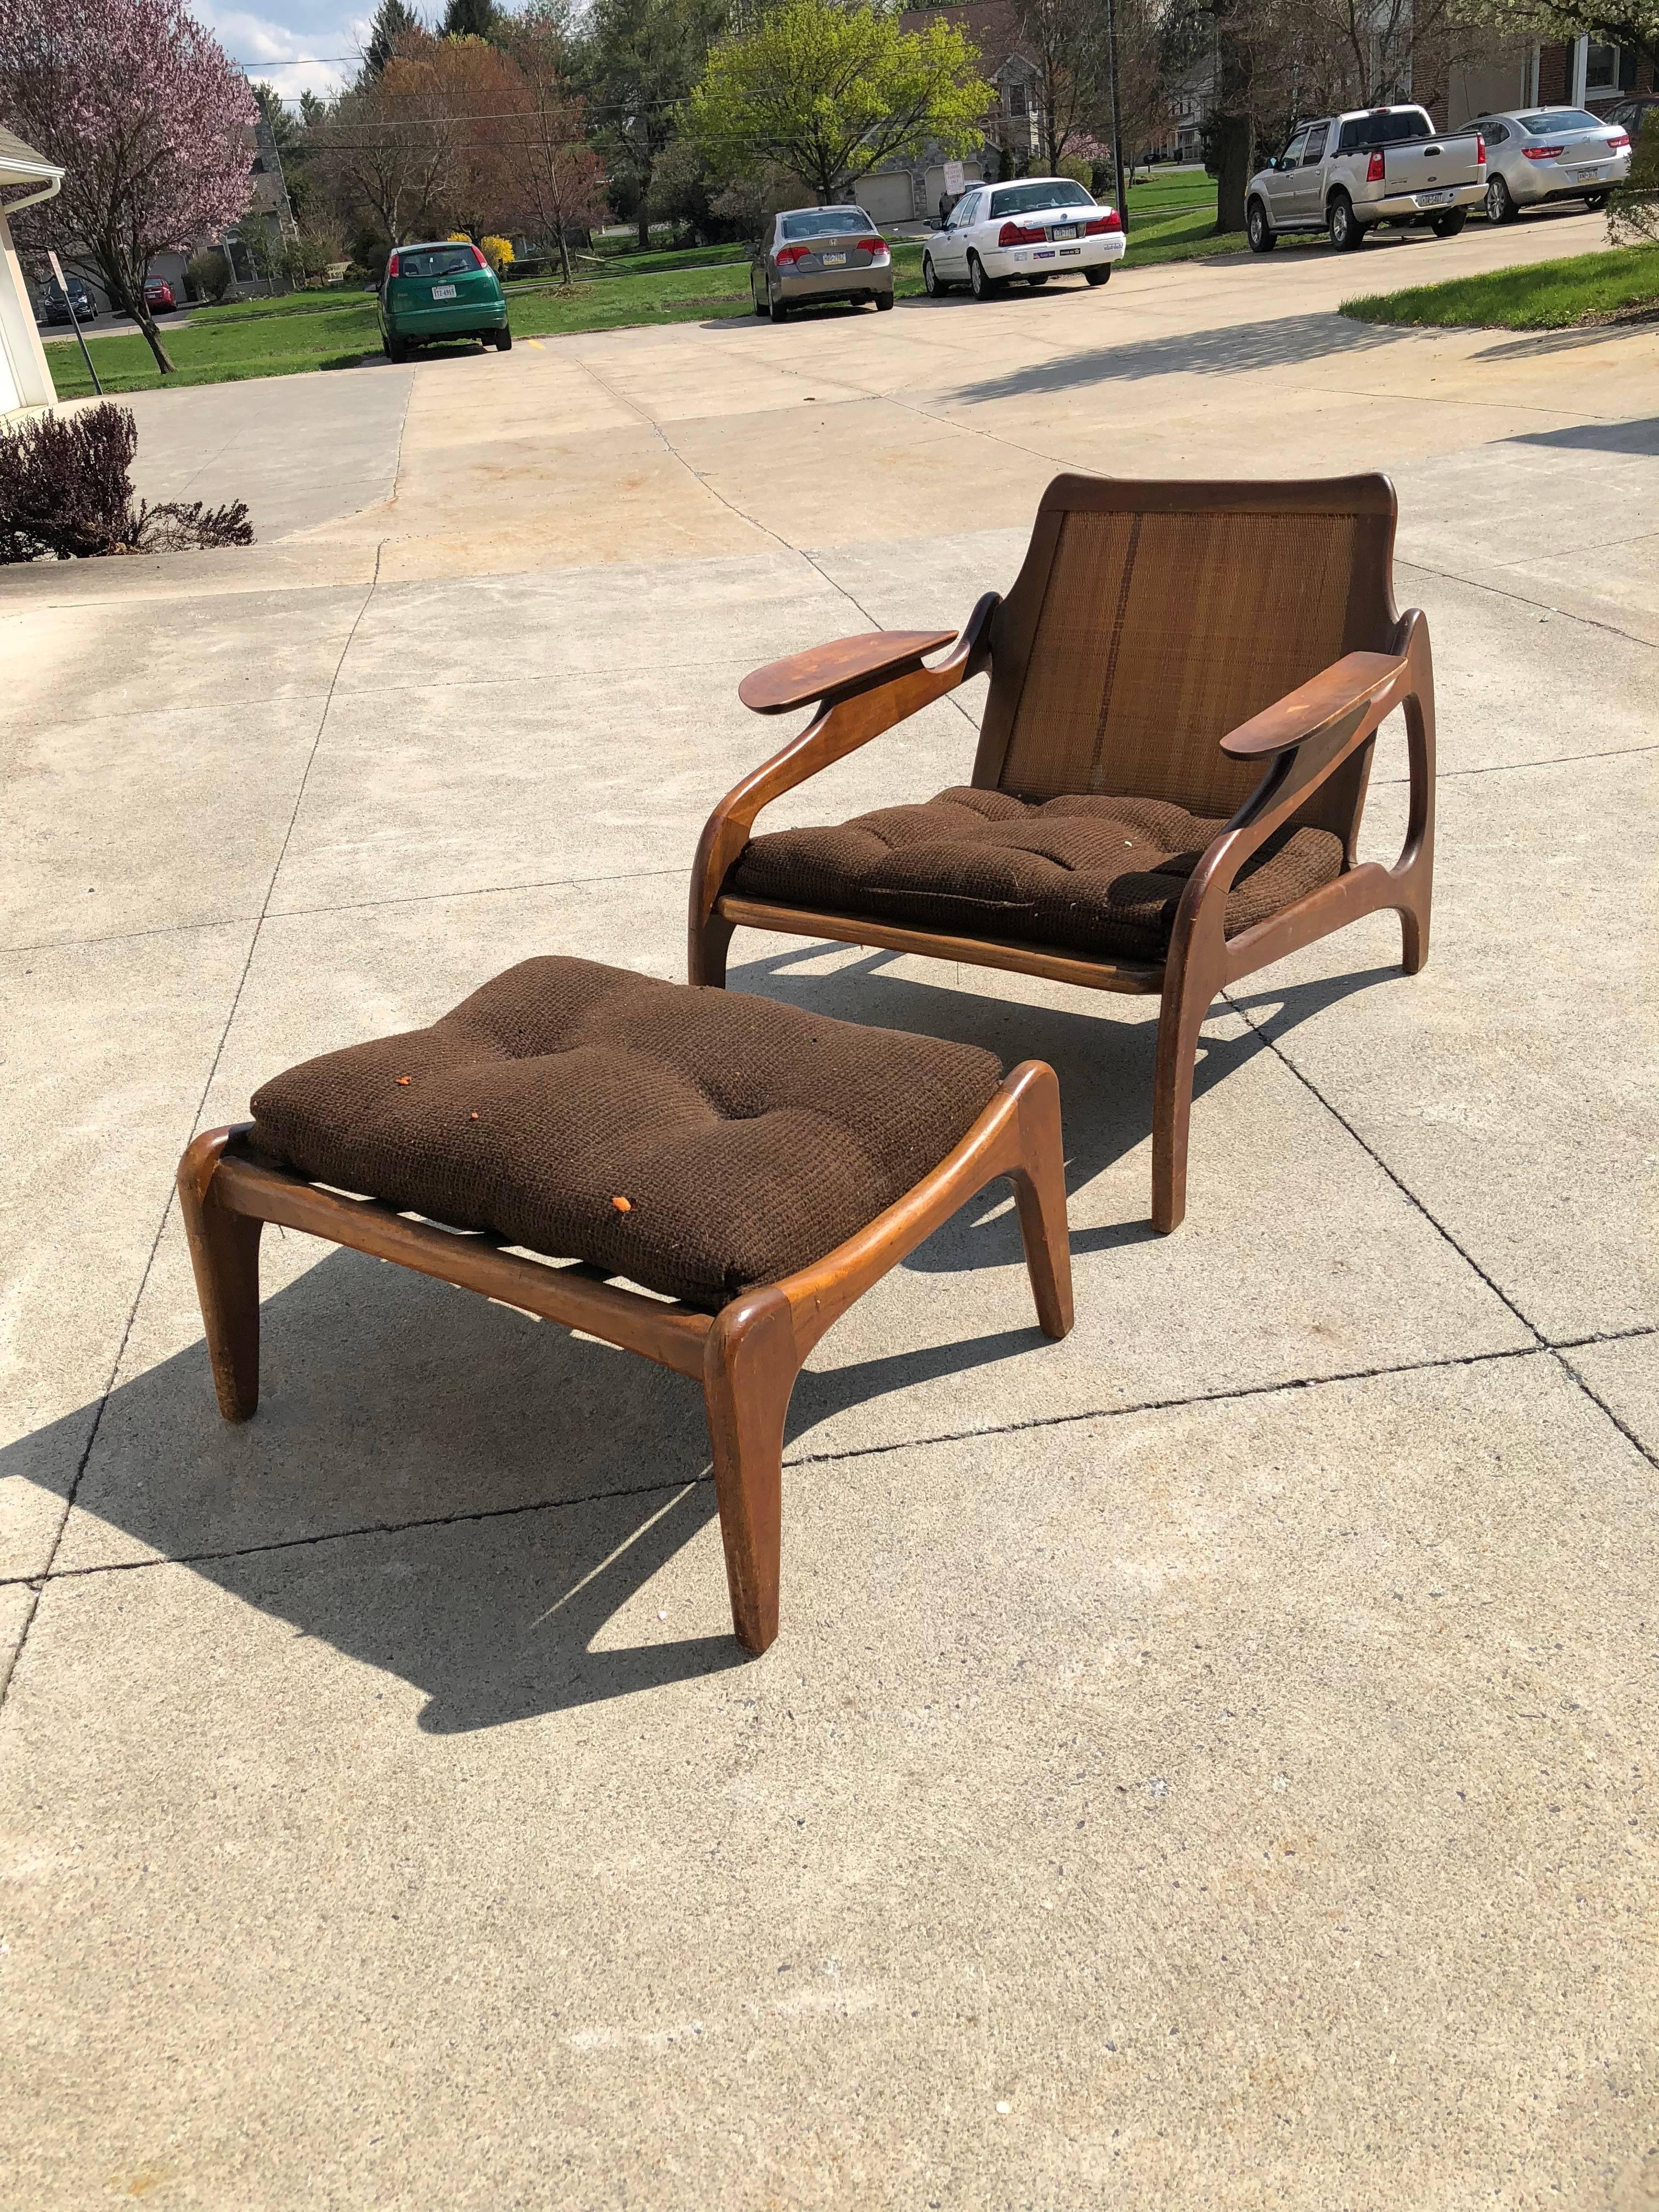 Very comfortable low slung lounge chair, model 1209c designed by Adrian Pearsall and made by Craft Associates. This chair and ottoman have solid walnut sculpted frame loose cushions an canned back.